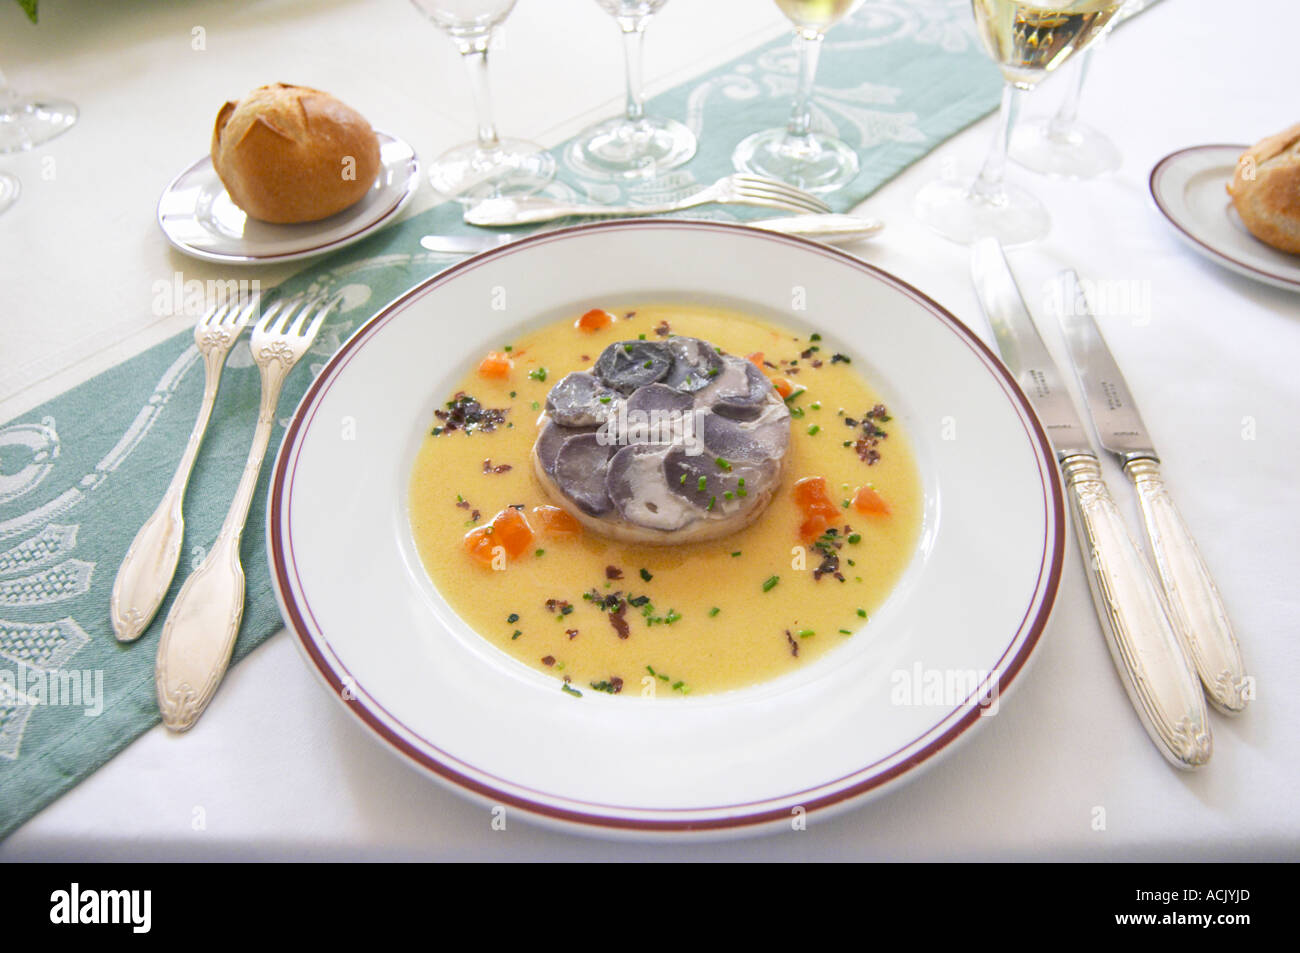 Round timbal with pikeperch fish covered with 'scales' of blue coloured potatoes in thin slices served with a beurre blanc butter sauce Chateau de Cerons (Cérons) Sauternes Gironde Aquitaine France Stock Photo